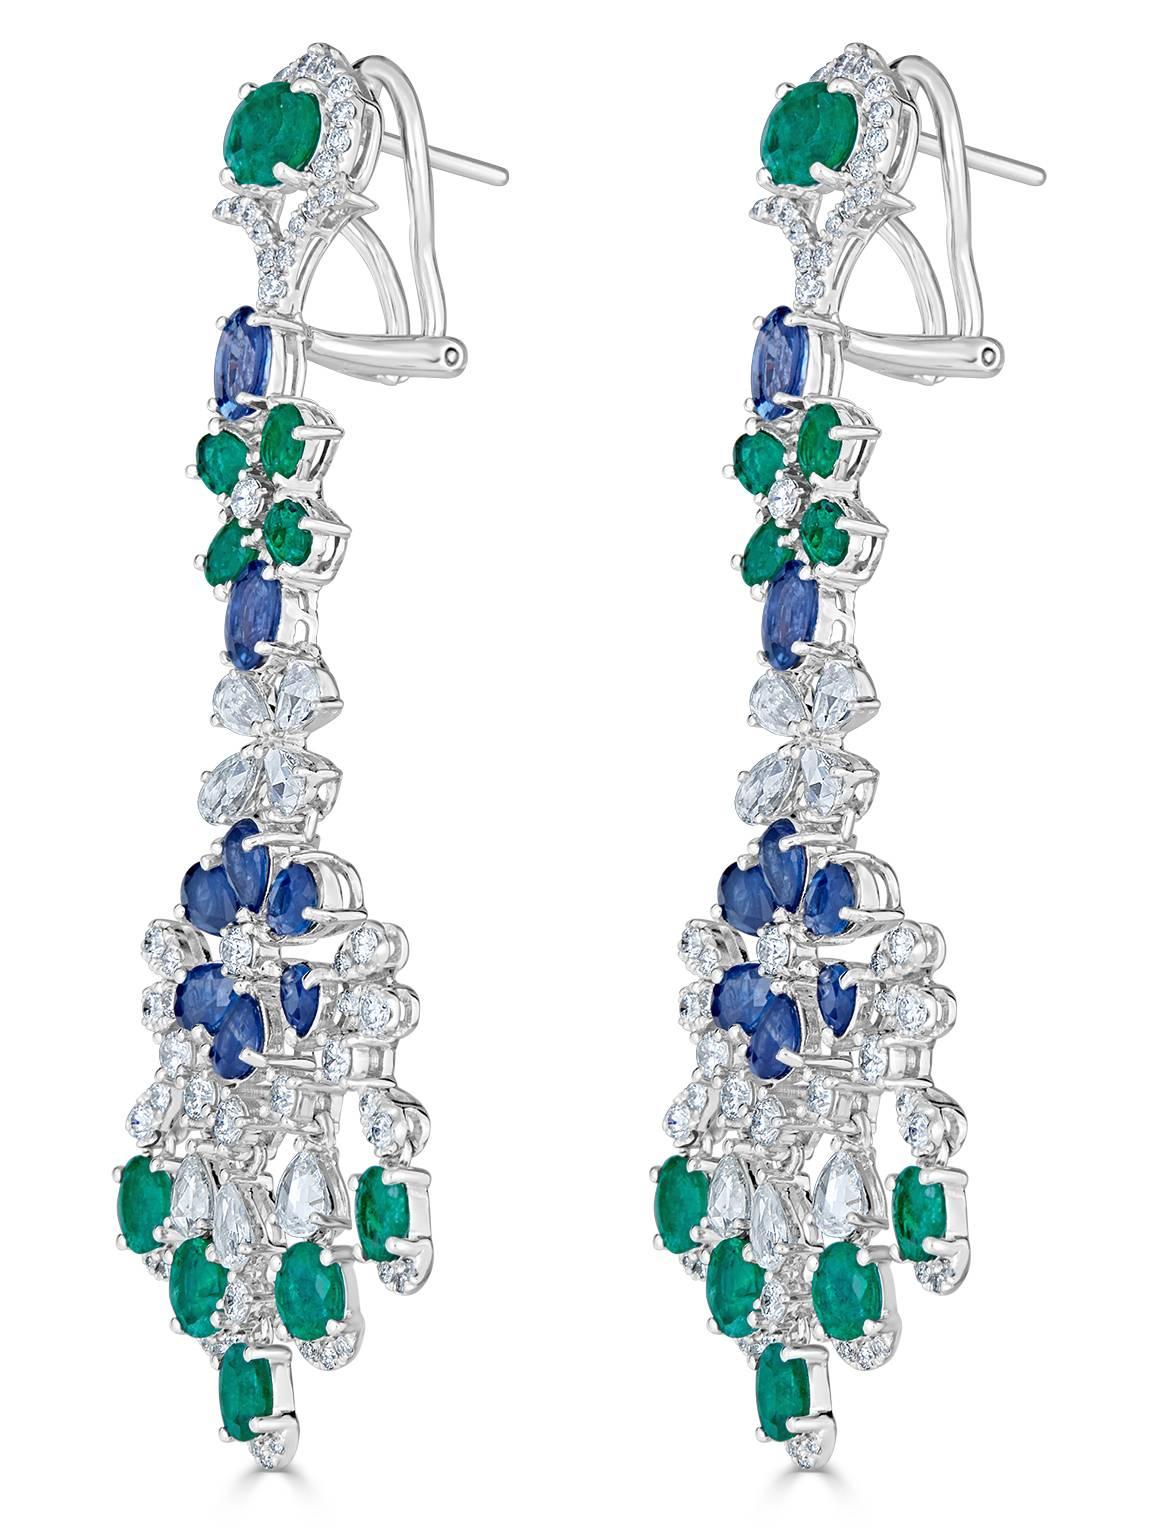 Green, Blue and White, oh my!  These fabulous earrings are sure to steal the show.  With 3.42 carats of sheer sparkle, these will not disappoint!  Omega Clip / Post

Length 65mm
Width 21mm

